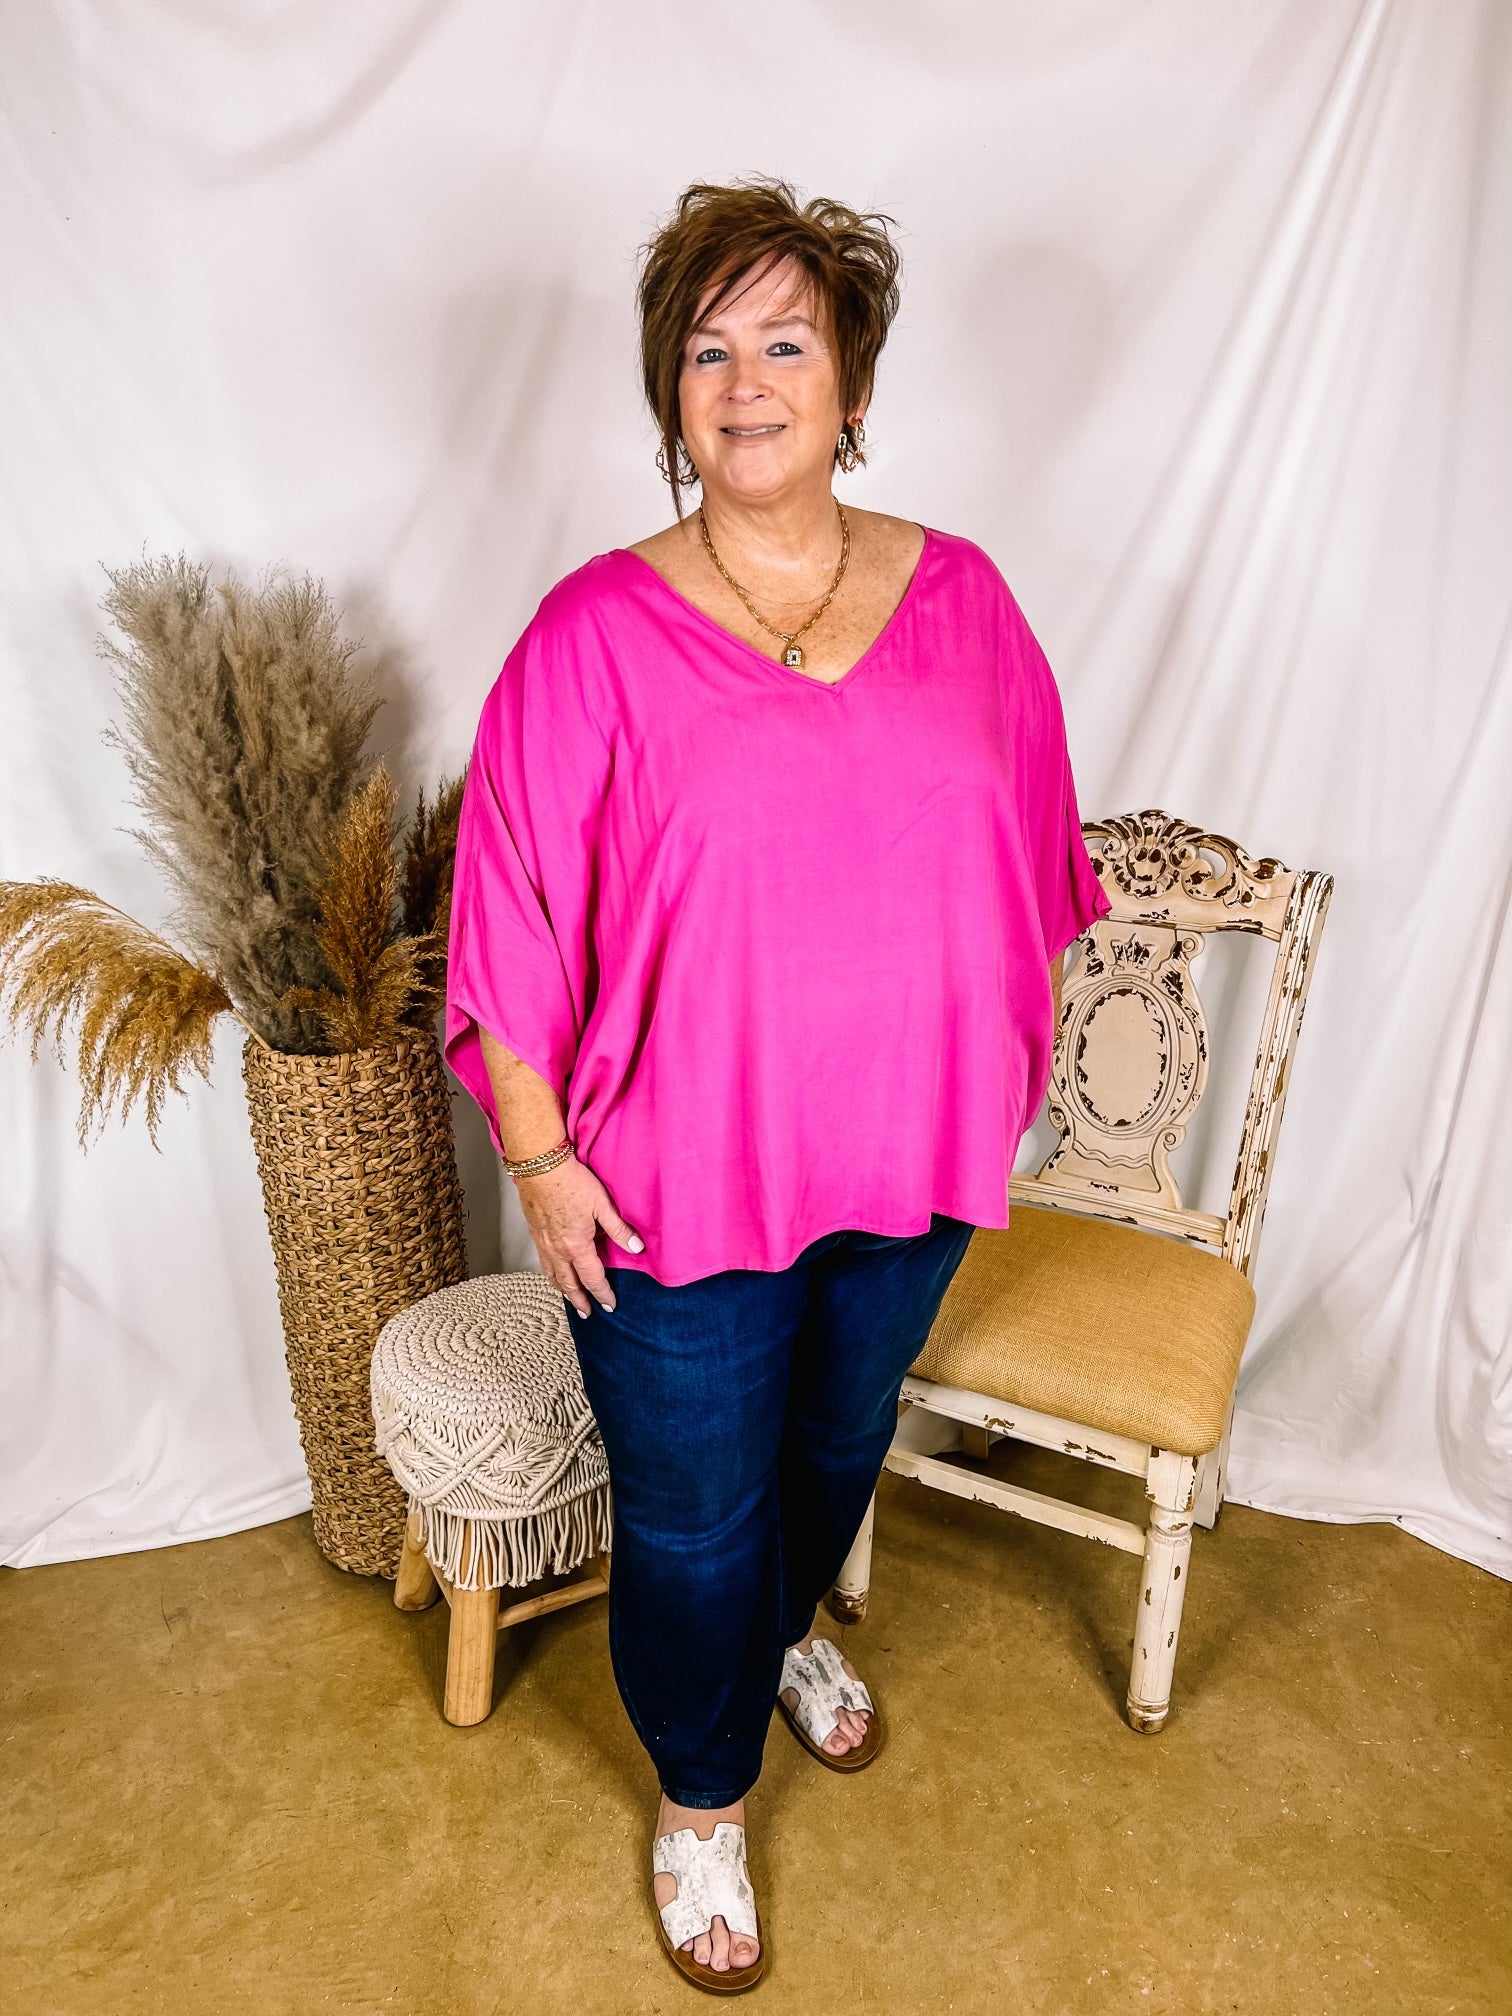 No Rules V Neck Poncho Top in Fuchsia Pink - Giddy Up Glamour Boutique